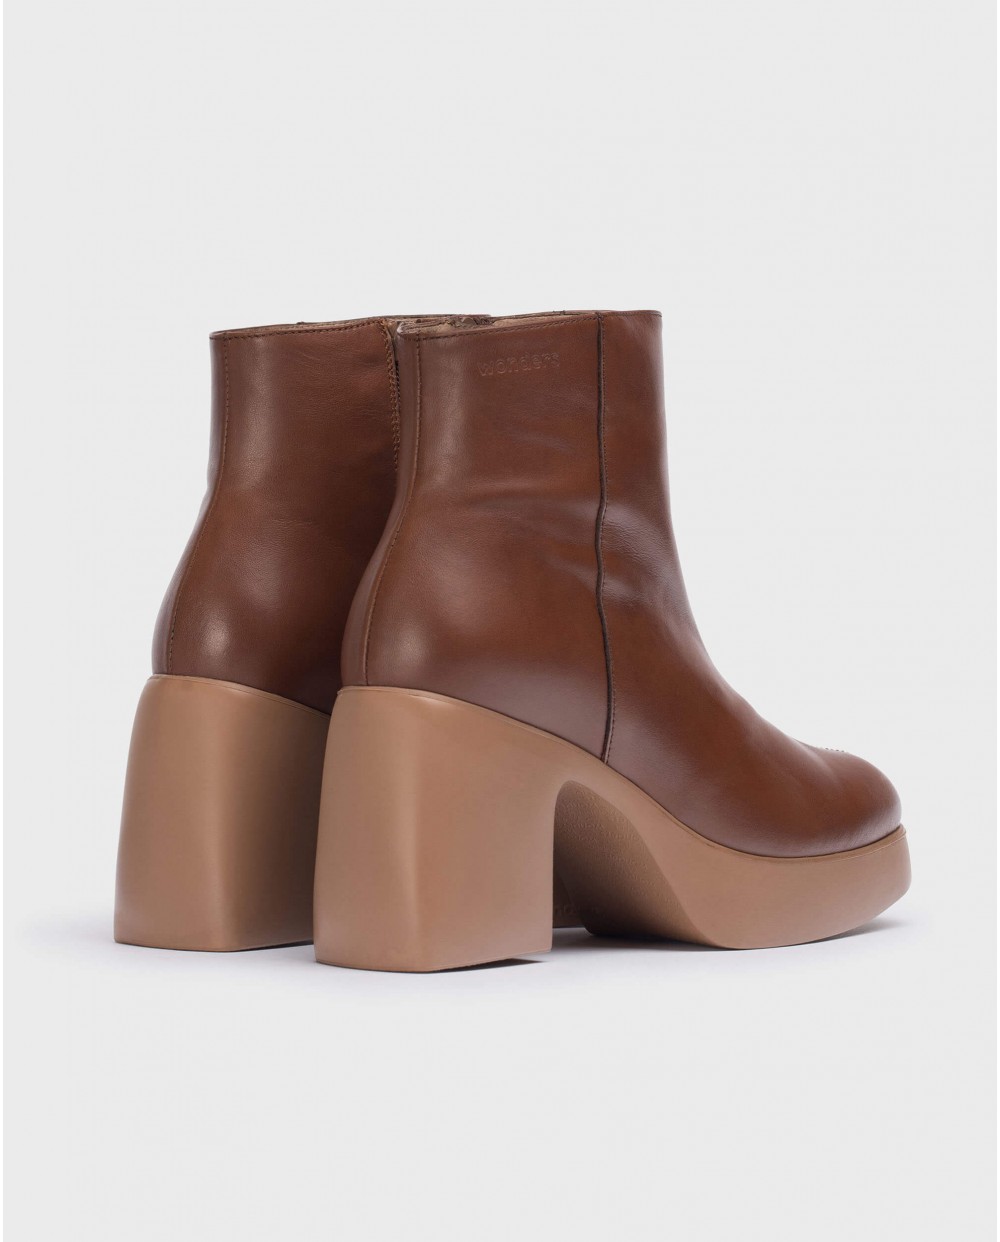 Wonders-Ankle Boots-Mex Ankle Boot